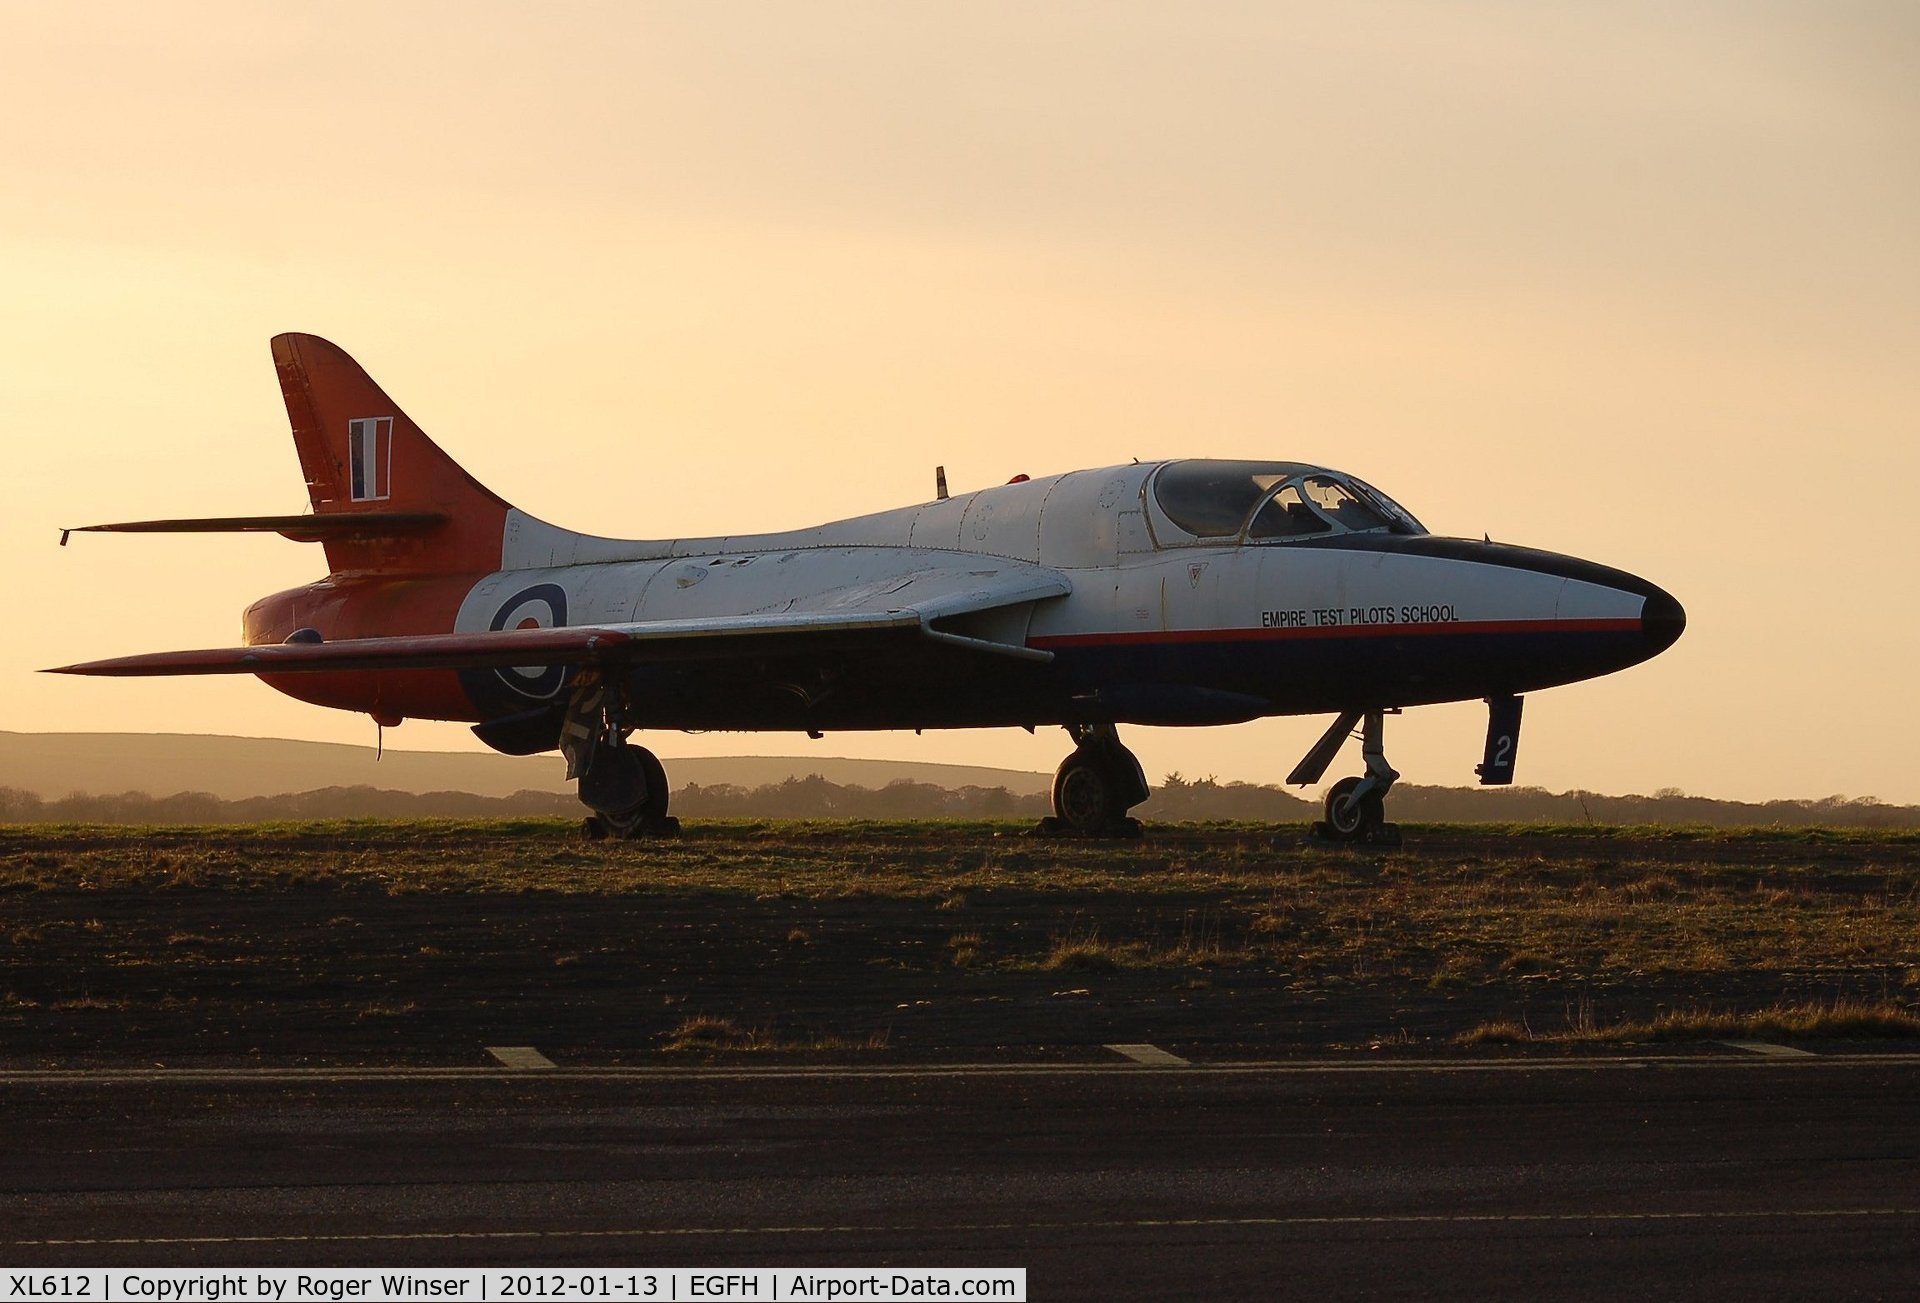 XL612, 1958 Hawker Hunter T.7 C/N 41H-695346, Seen at dusk, Hunter Flying Ltd's Hawker Hunter T.7 on loan to the airport for 2 to 3 years.